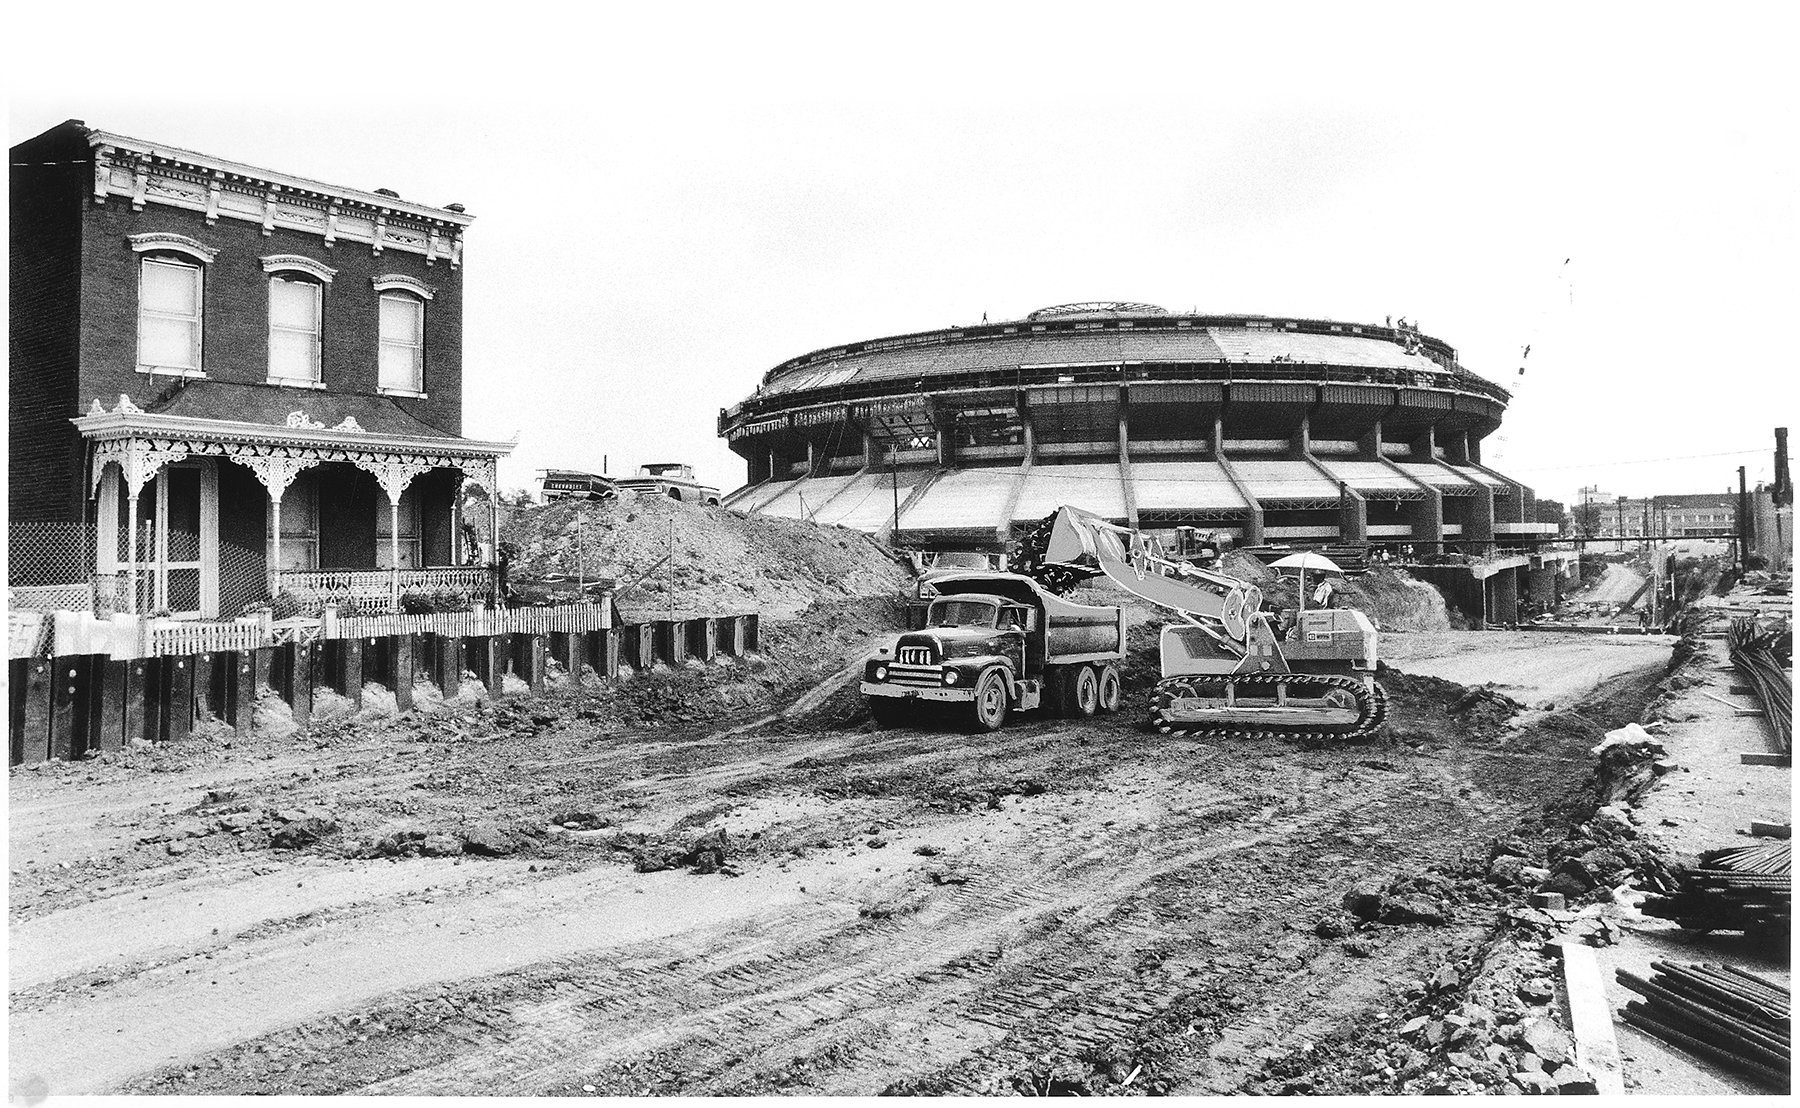 This image is a black and white photo with a 1950s style truck and construction equipment doing work near the coliseum in RVA 